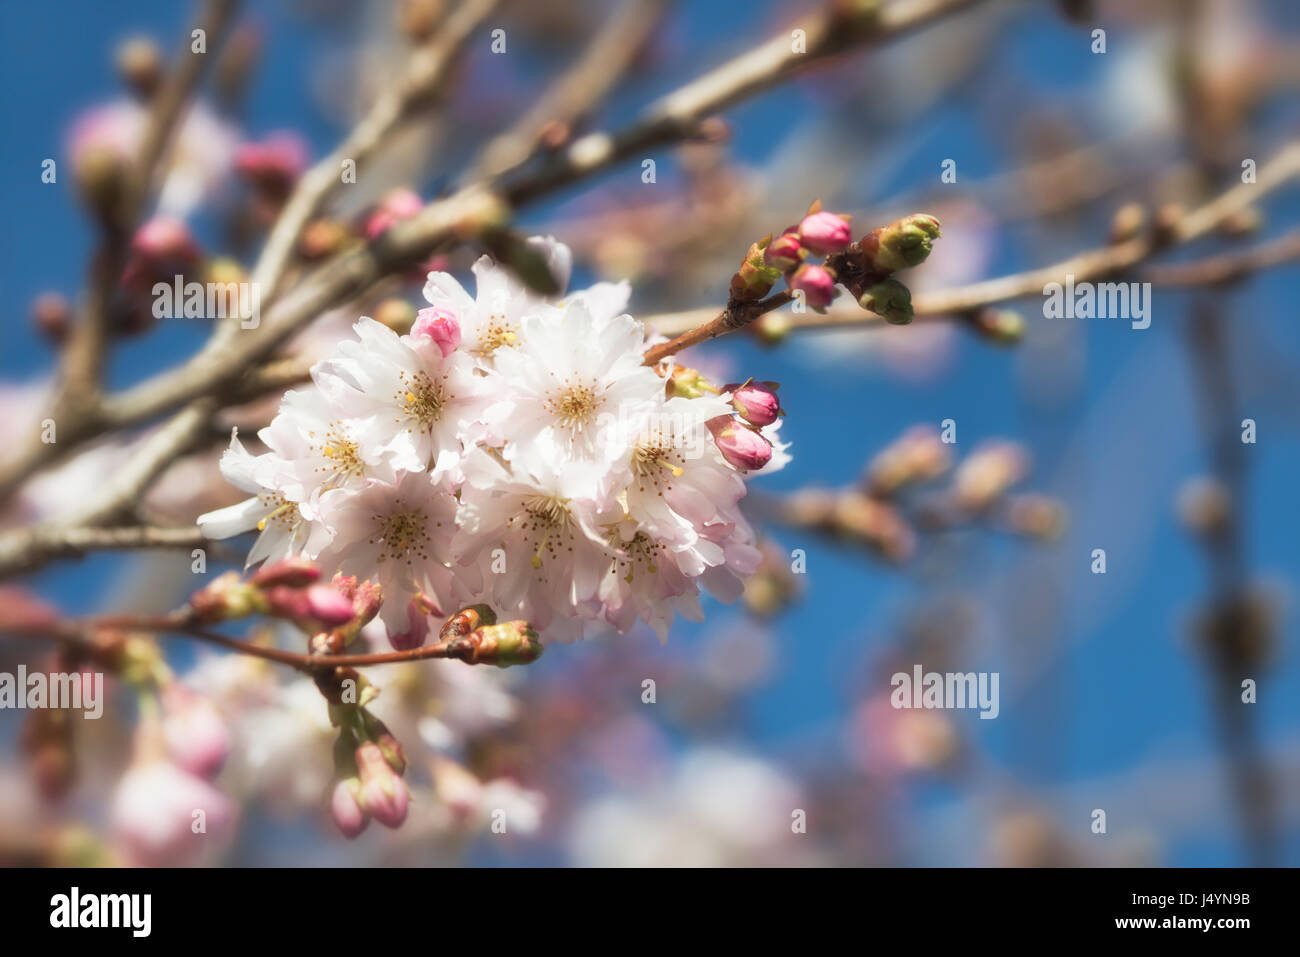 This cherry flowers  (Prunus avium) are light pink. They show style and stigma sourrounded by stamen and anther. Stock Photo